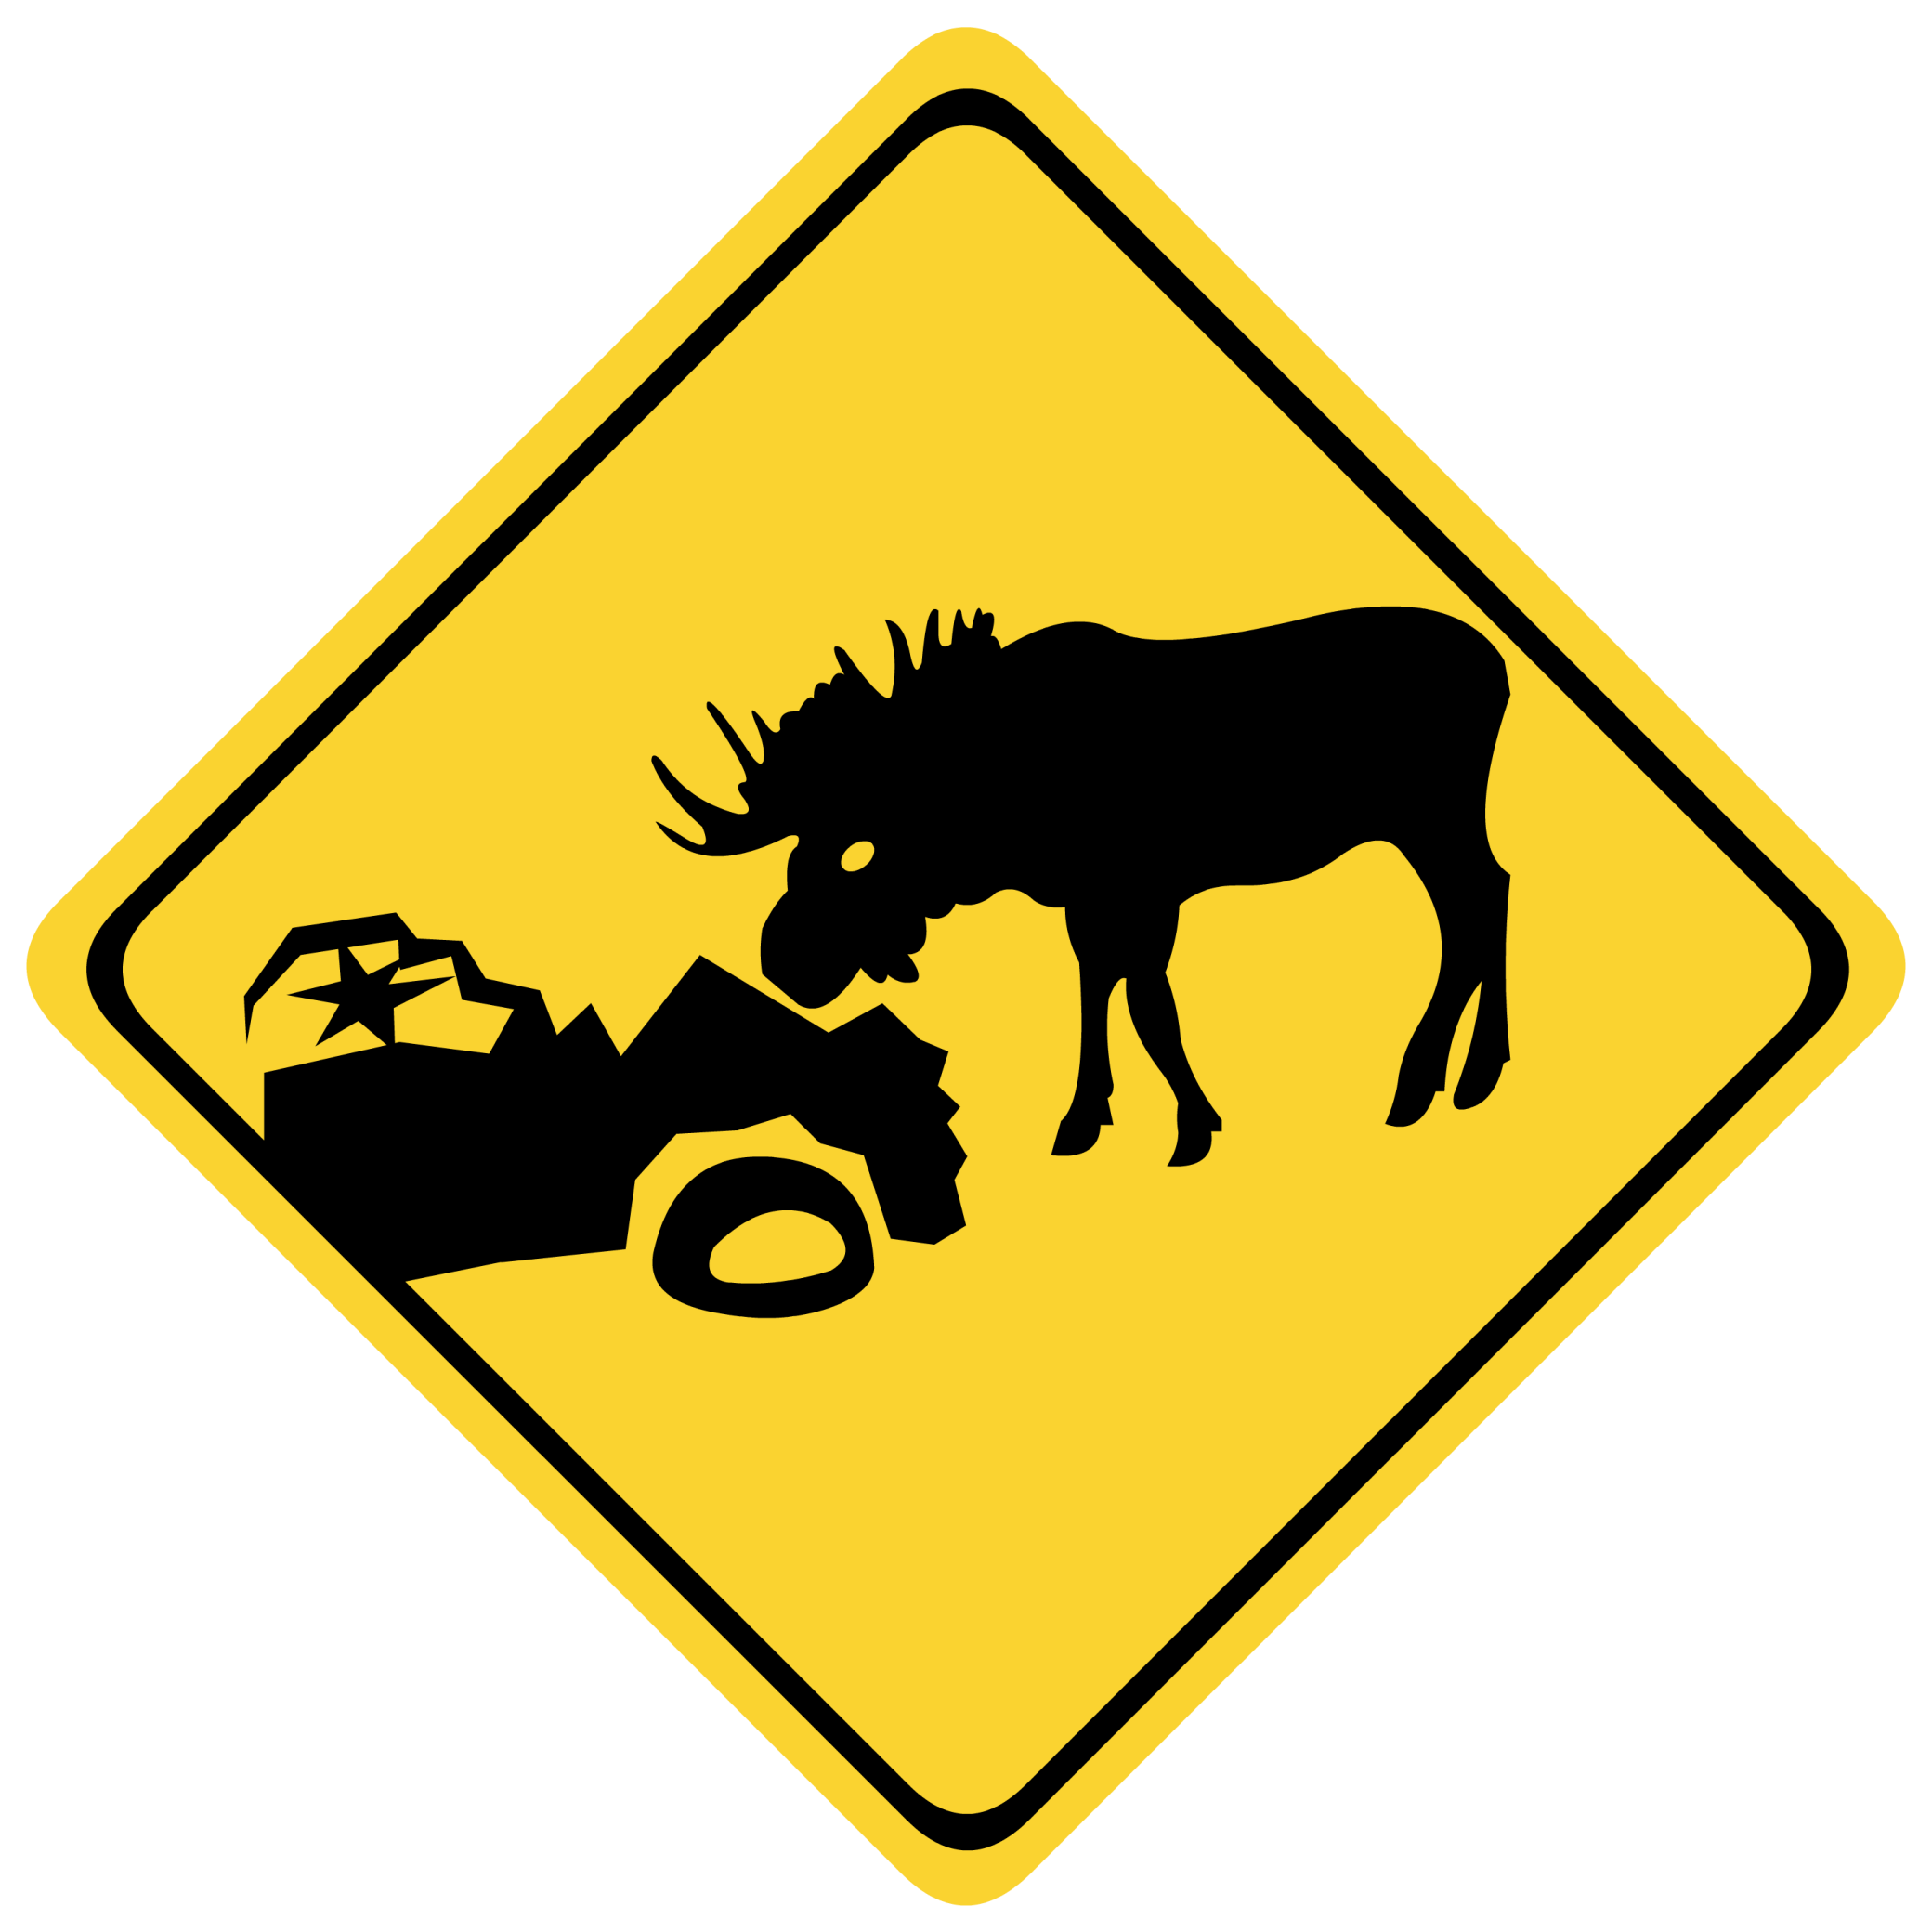 Canada Warning Traffic Road Sign Free Transparent Image HQ Clipart